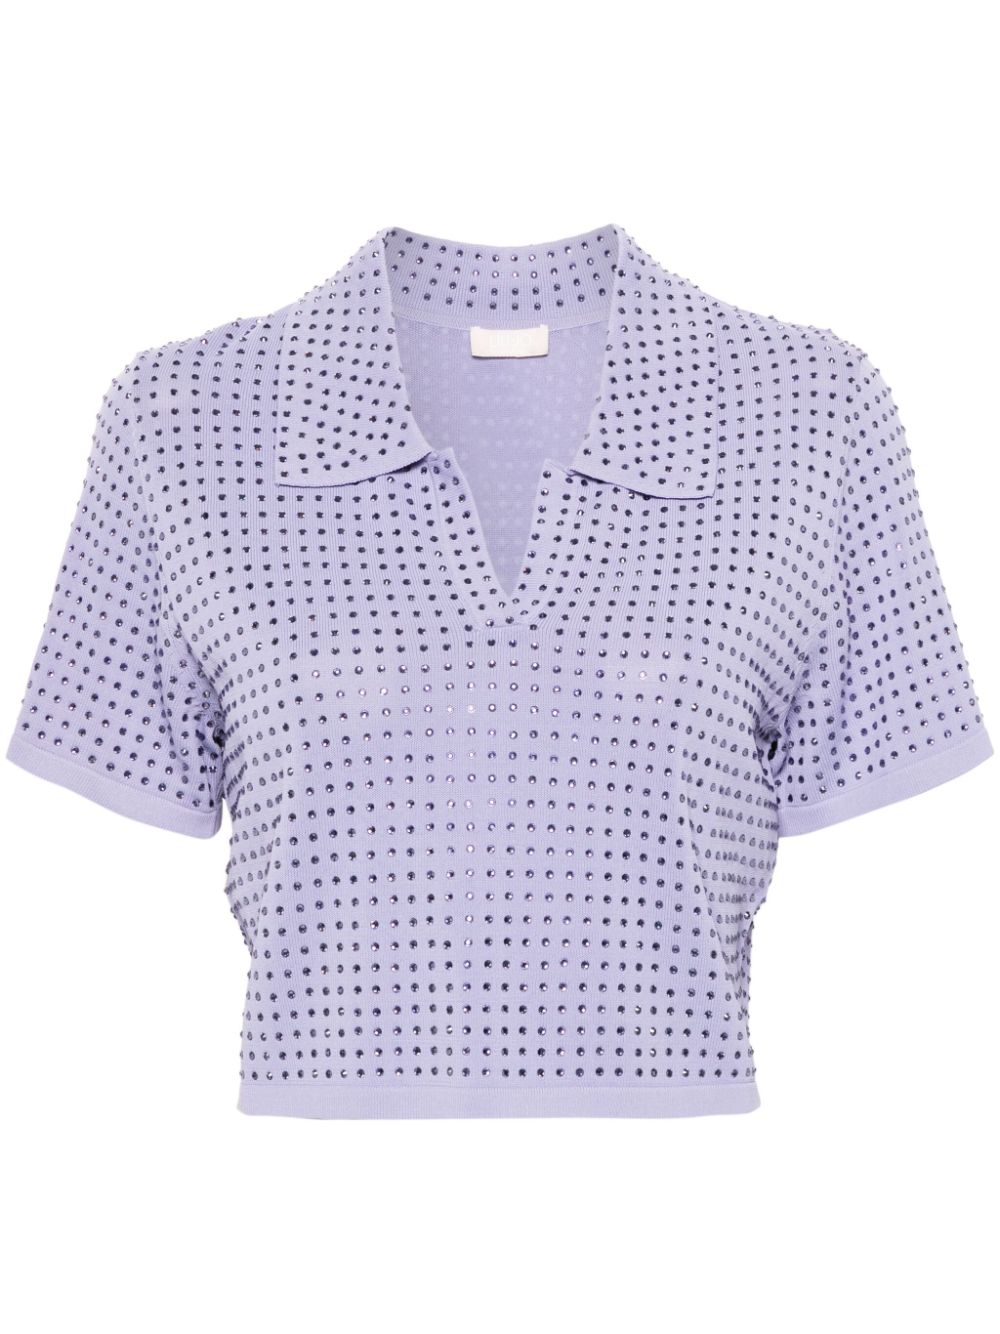 crystal-embellished knitted polo shirt